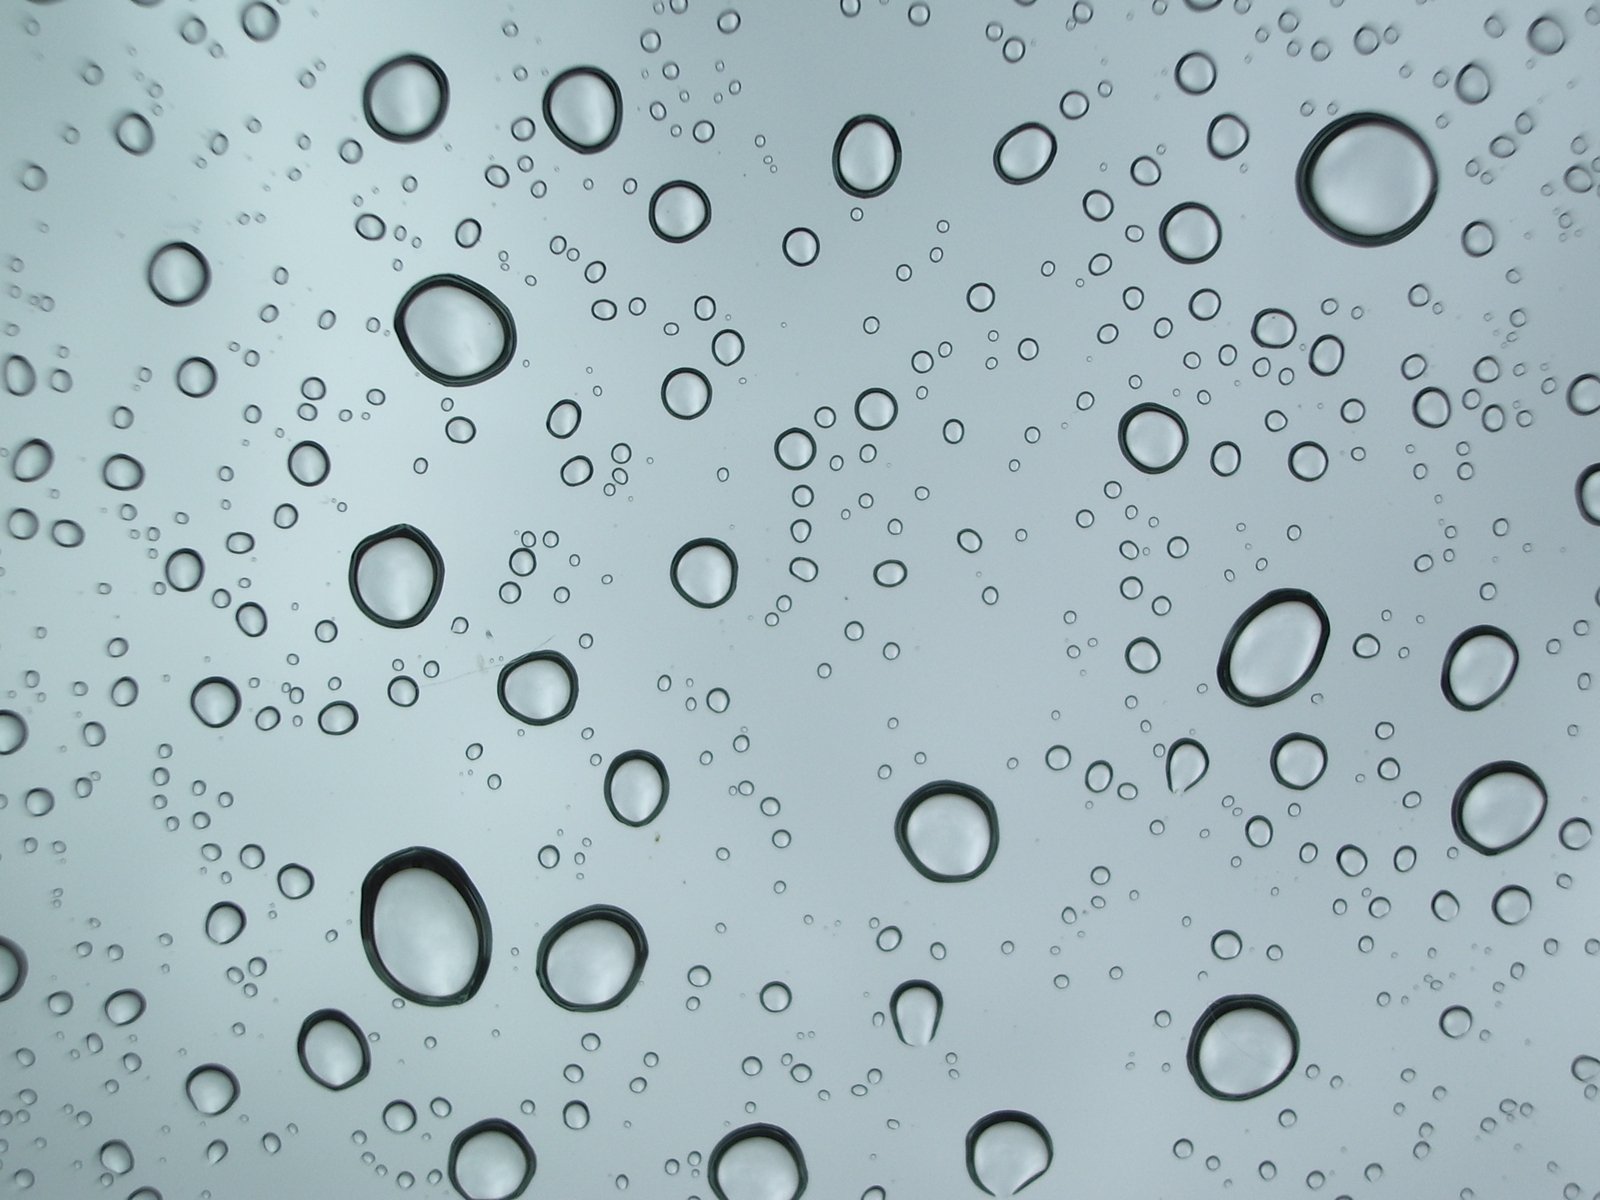 droplets of water floating down on the surface